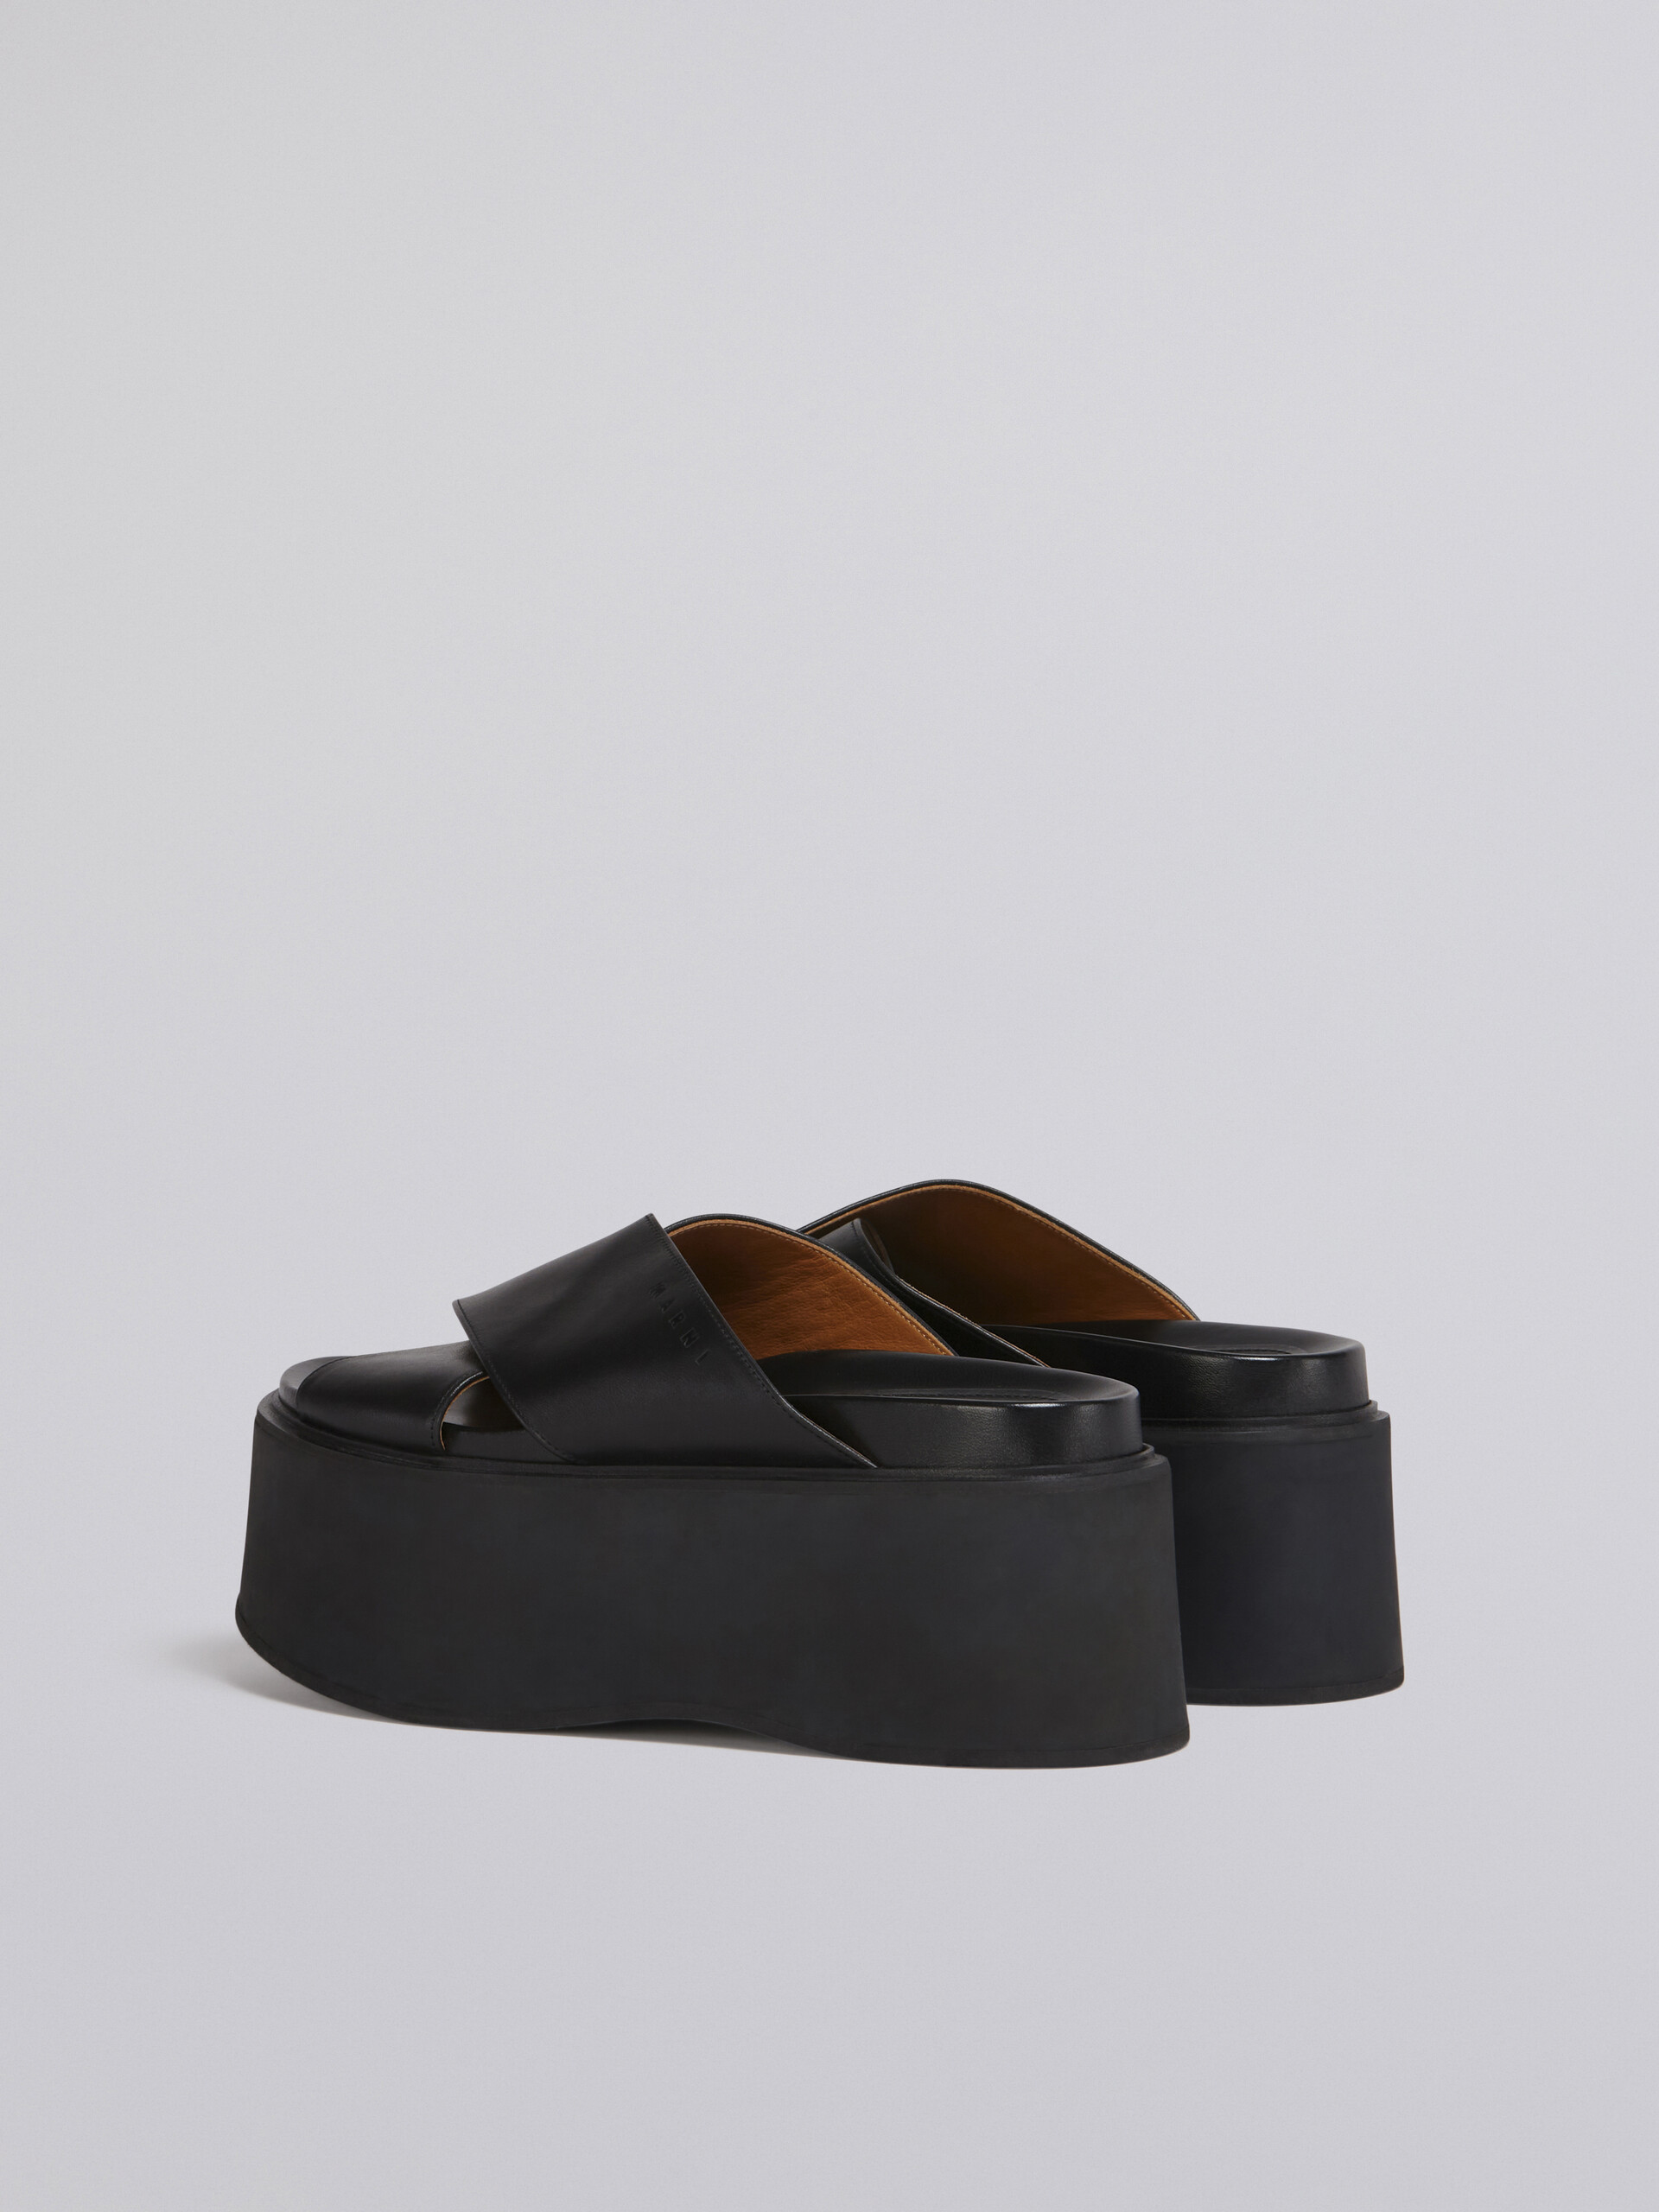 Criss-cross wedge in black calf leather - Sandals - Image 3